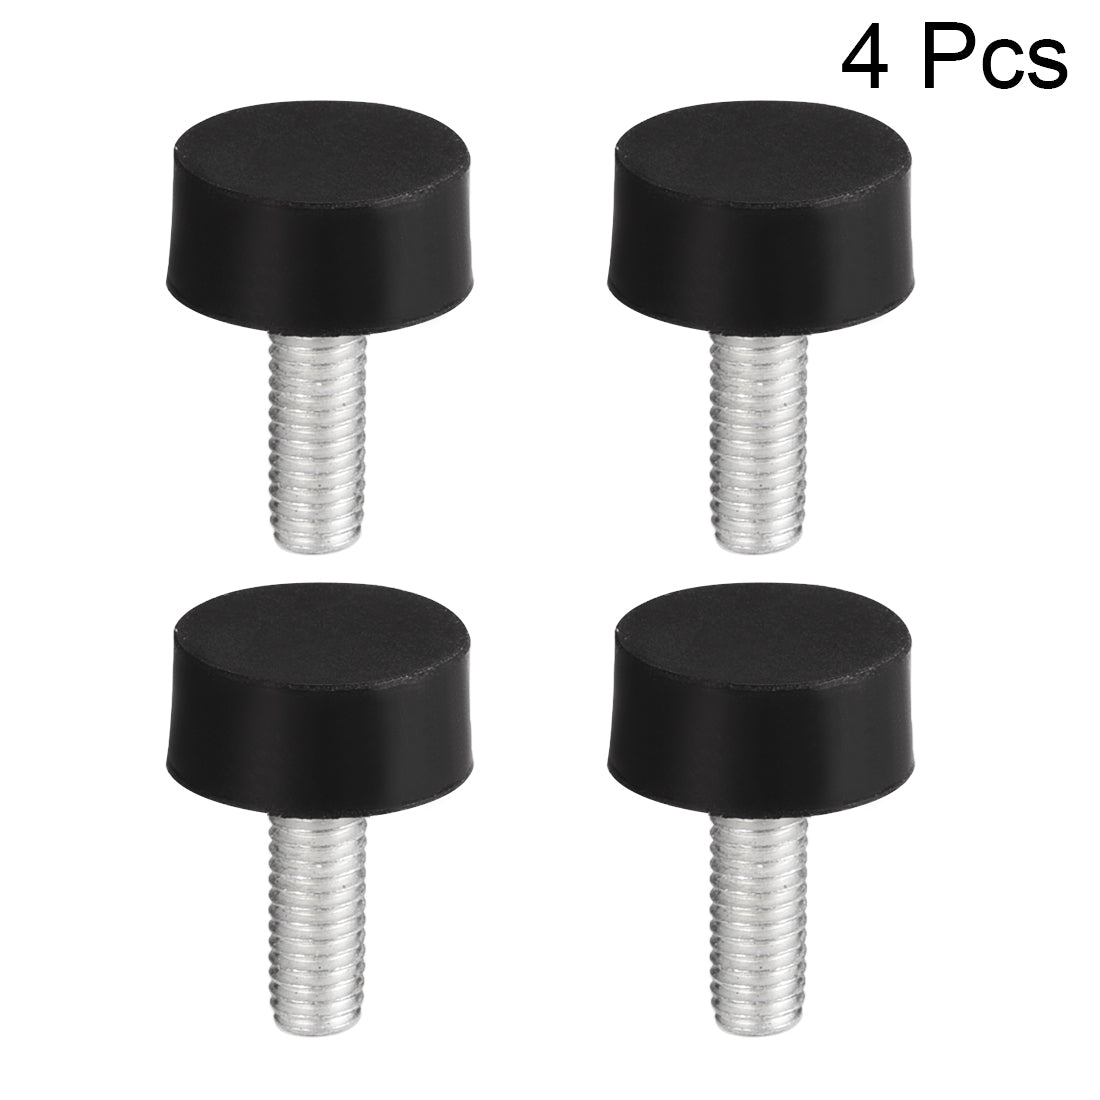 uxcell Uxcell M6 Thread Rubber Mounts,Vibration Isolators,Cylindrical w Studs,18mm x 8mm,4pcs